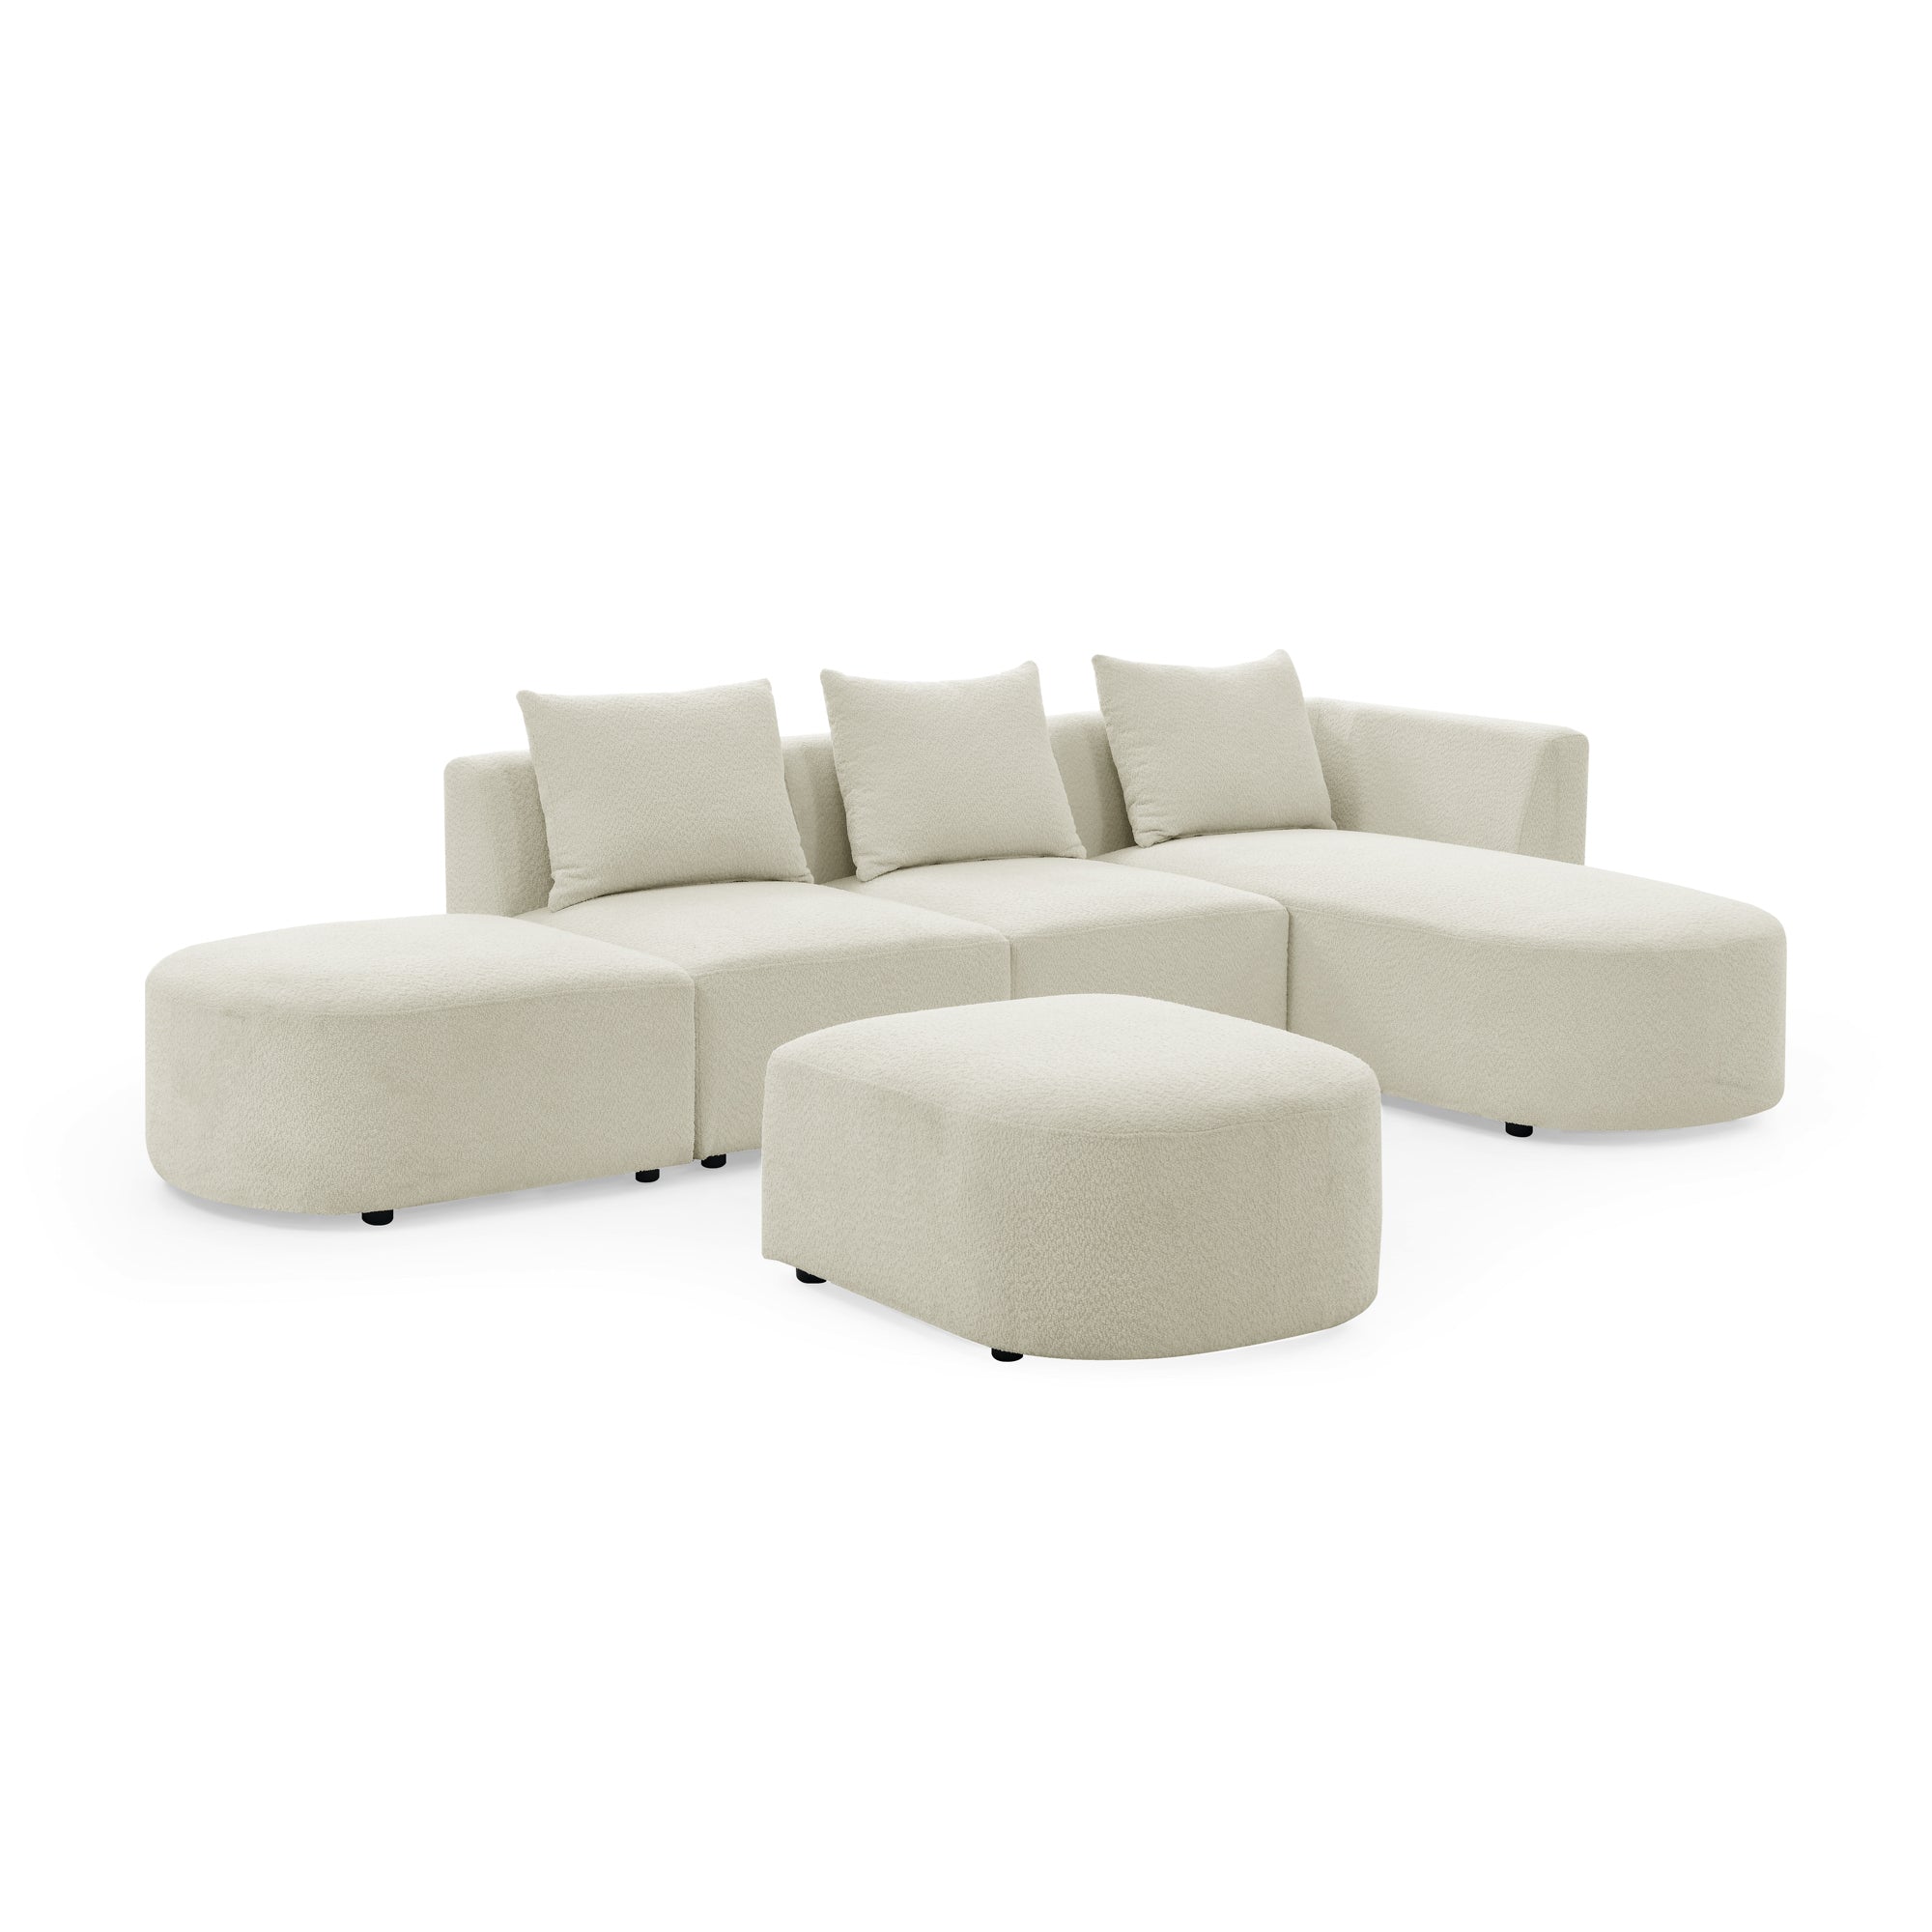 Bellemave 113" L-Shape Sectional Sofa with Right Side Chaise and Ottoman, Modular Sofa, DIY Combination Bellemave